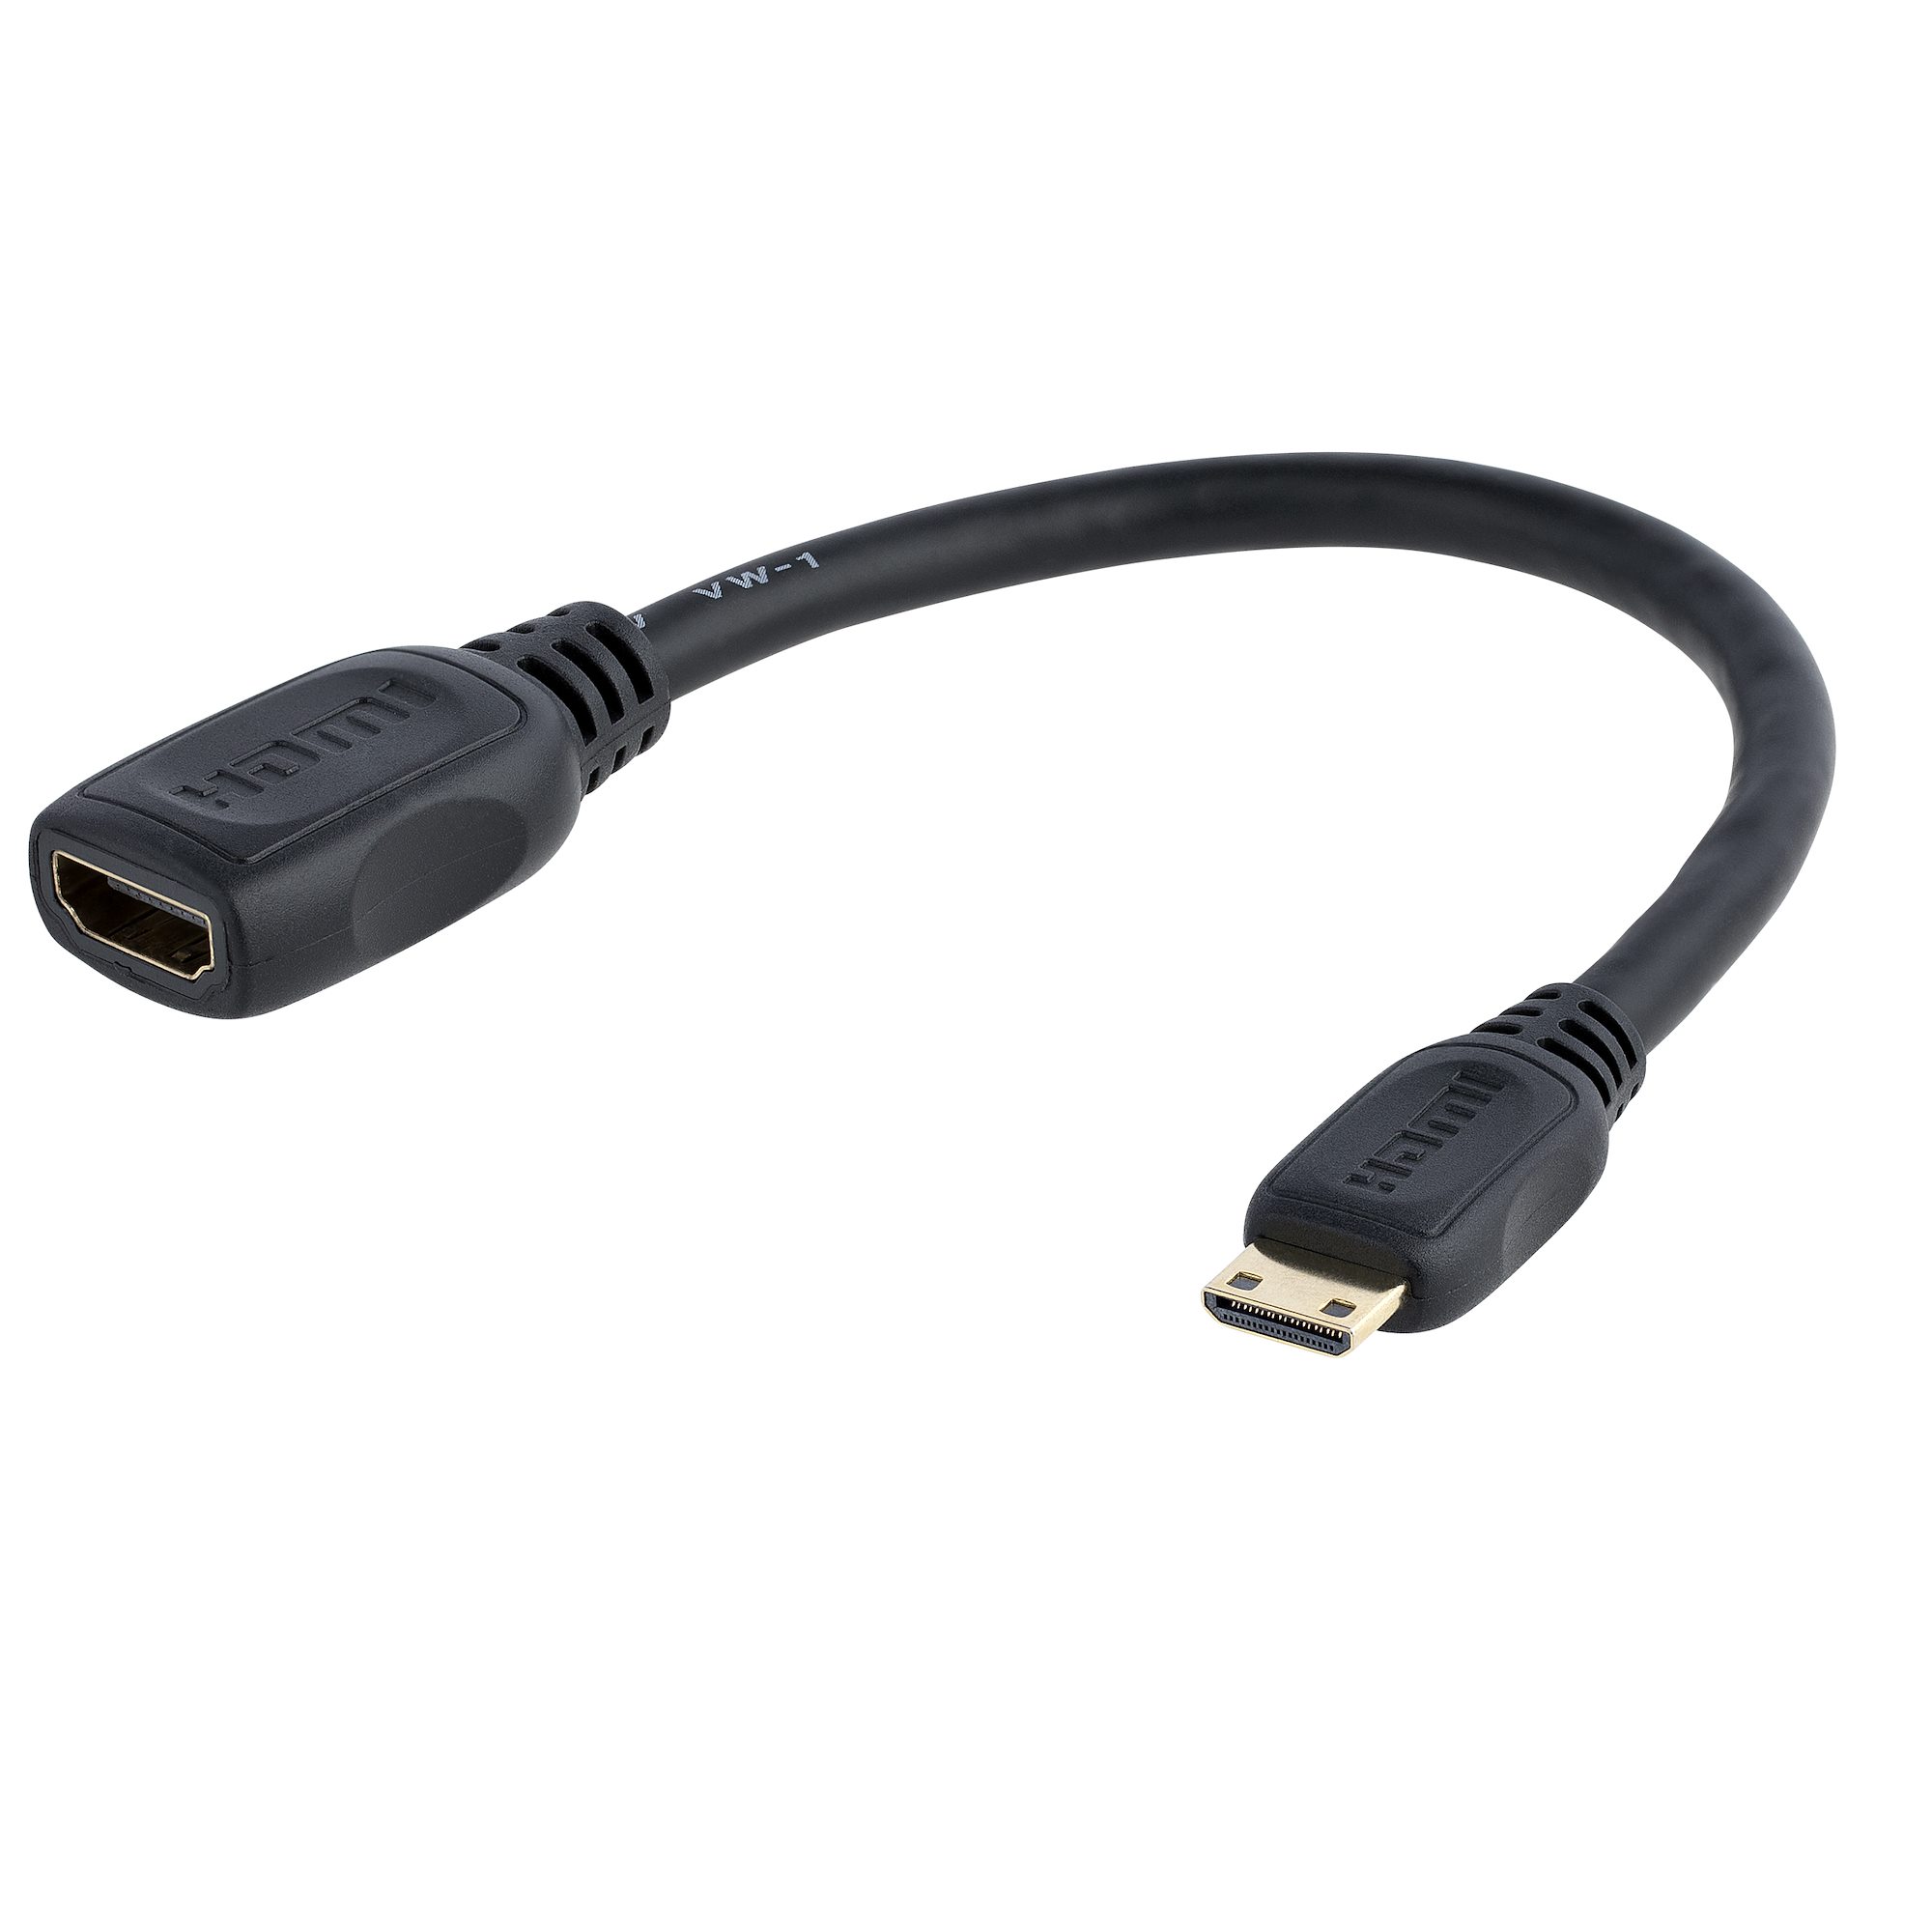 Overhale Smil Gentleman StarTech.com Mini HDMI to HDMI Adapter - HDMI® Cables & HDMI Adapters |  StarTech.com